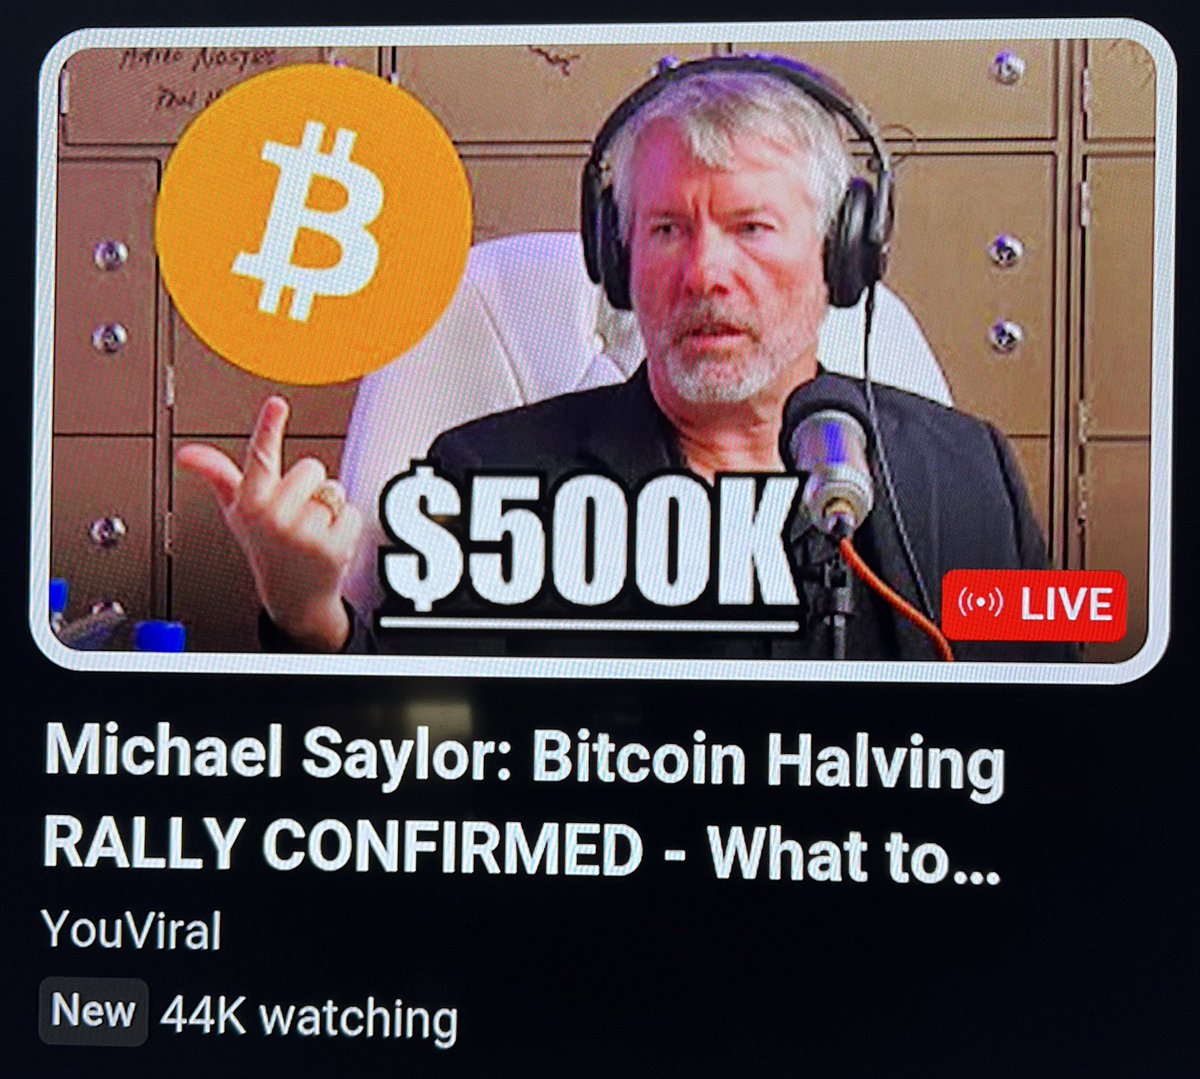 This is so sad!  It pains me to see that 44 thousand people are tuning in to this YouTube scam, using Michael Saylor’s image and AI to encourage them to send Bitcoin to a code with the promise of double the amount sent and returned to them. @saylor #BitcoinScam #CryptoScam…